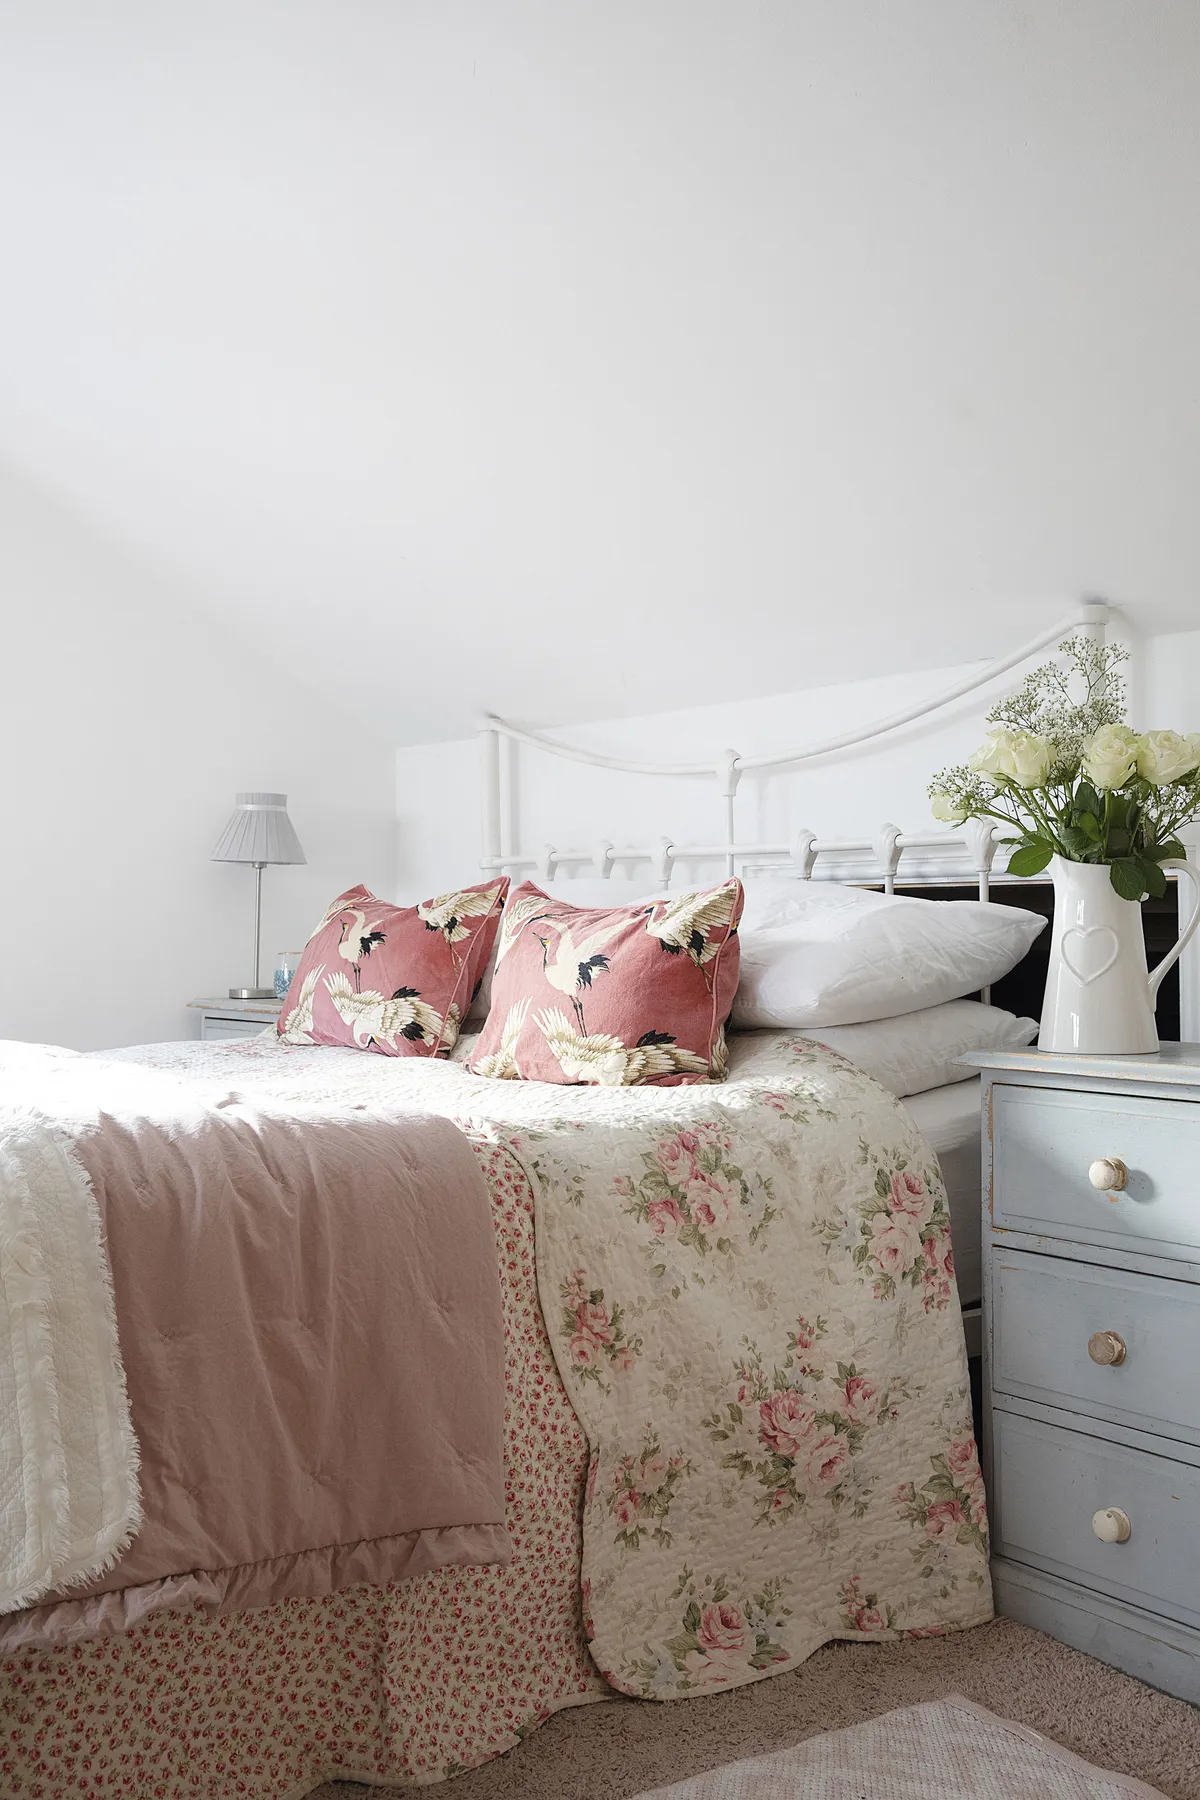 With white walls, the master bedroom has a calm feel to it, but